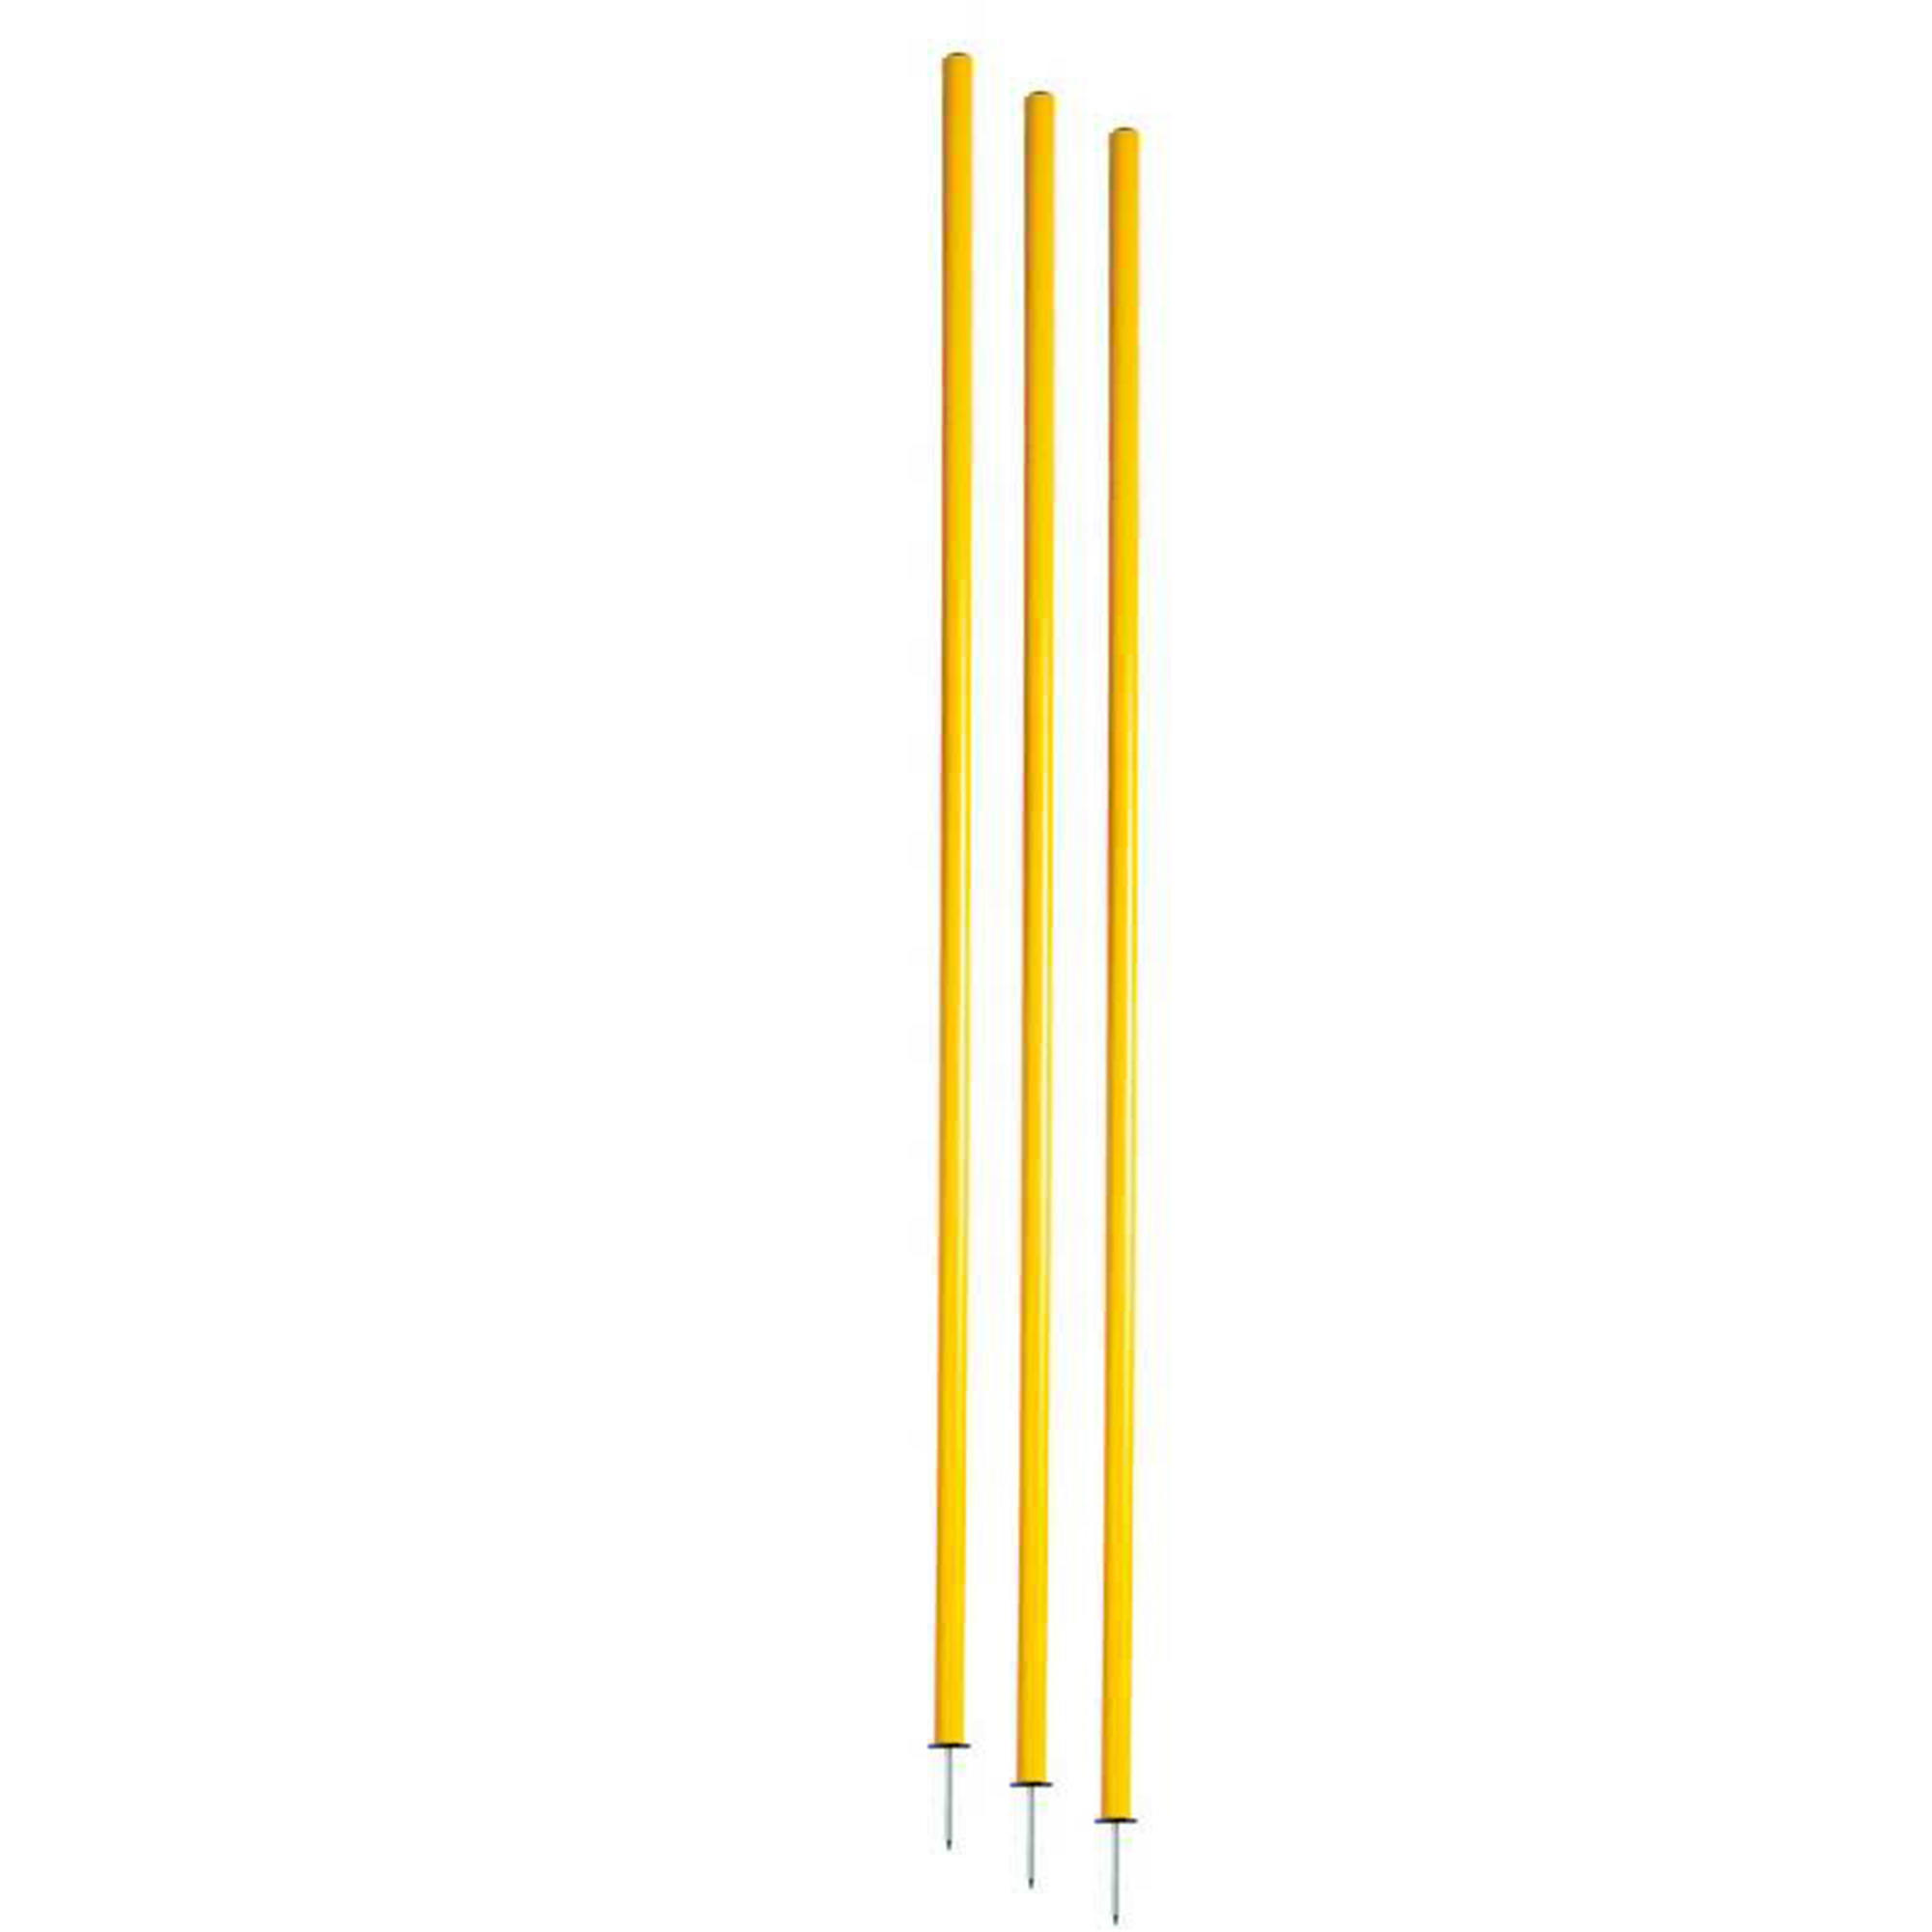 Slalom Training Pack of 3 Poles - Yellow Red 1/1